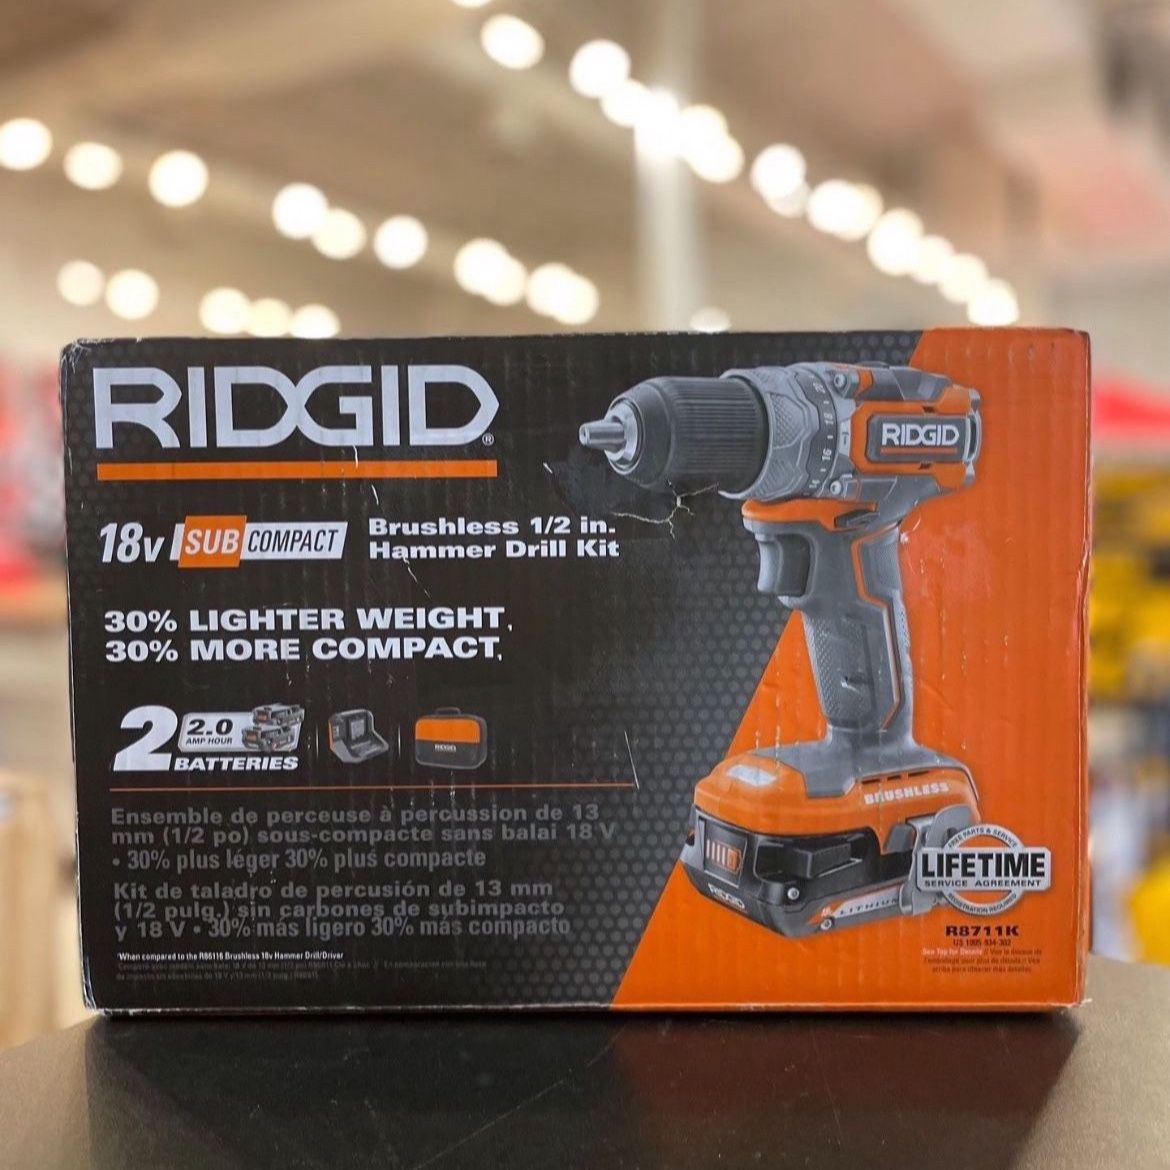 RIDGID 18V SUBCOMPACT BRUSHLESS 1/2” HAMMER DRILL KIT WITH 2 BATTERIES & CHARGER R8711K 